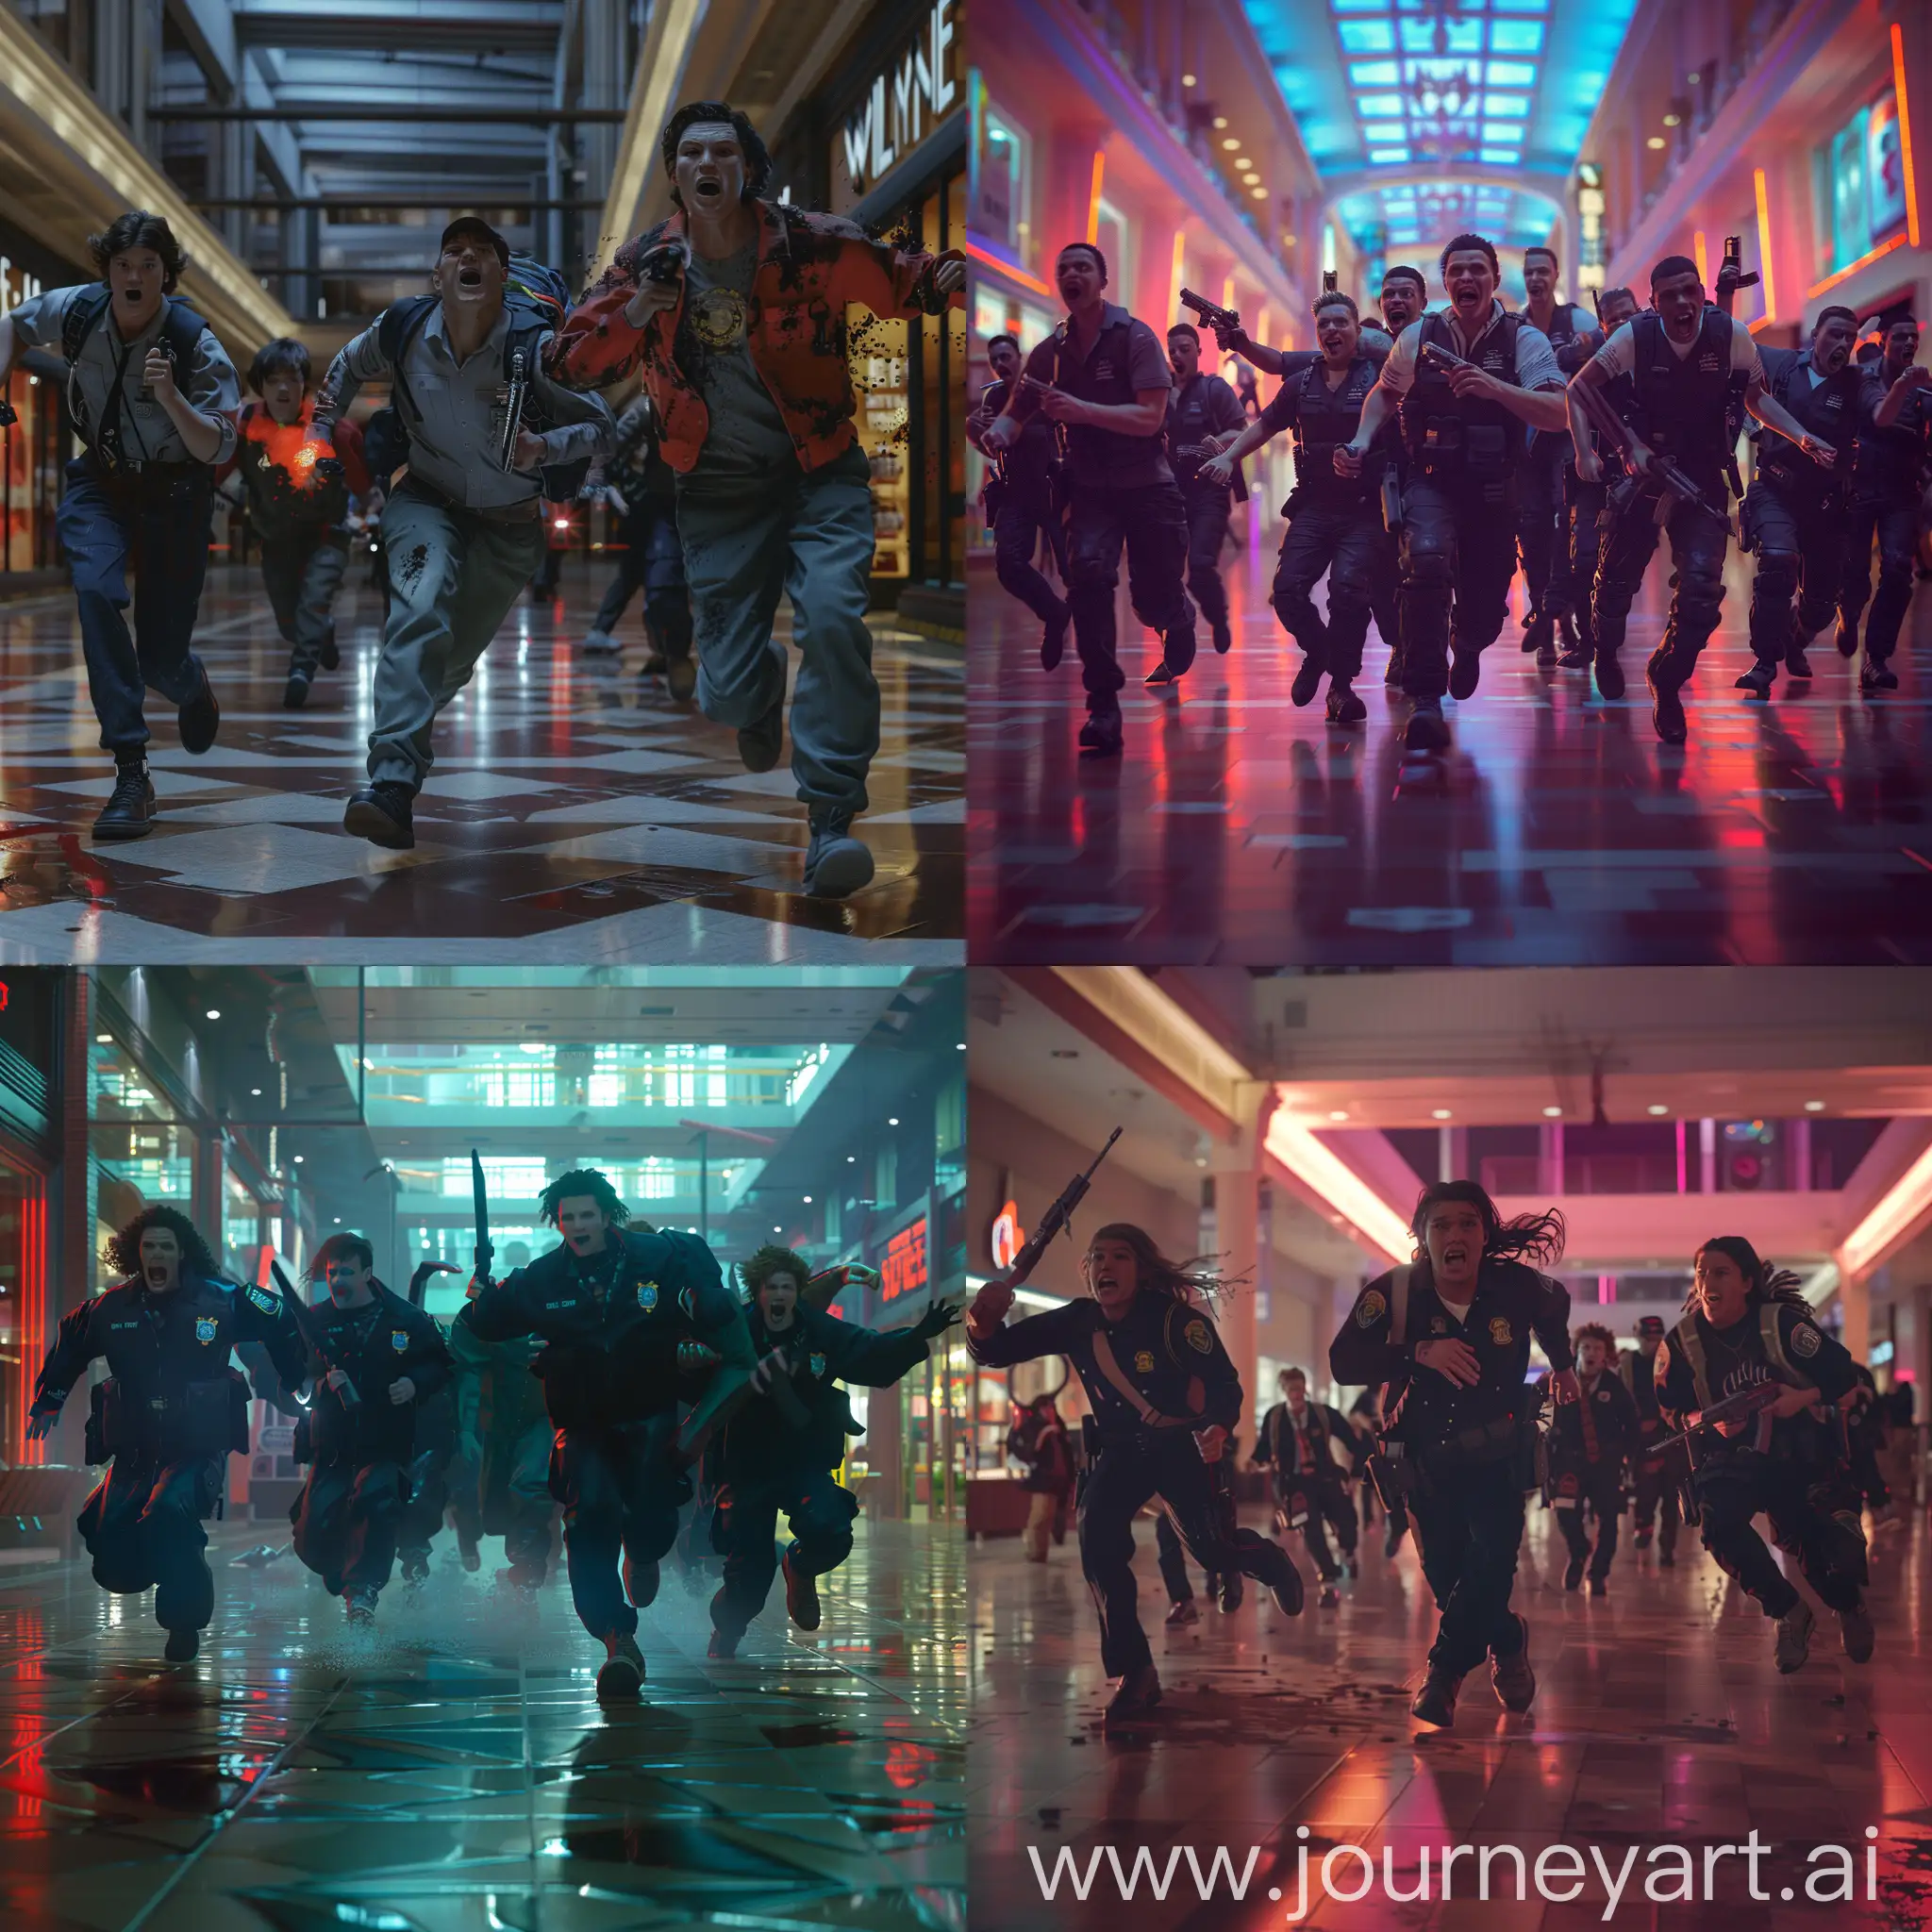 photo-realistic, 4k,35mm, a group of mall security guards run from a pack of wild punk rock teens who chase them through the mall, they flee in terror as the punks wave weapons and laugh, atmospheric lighting 